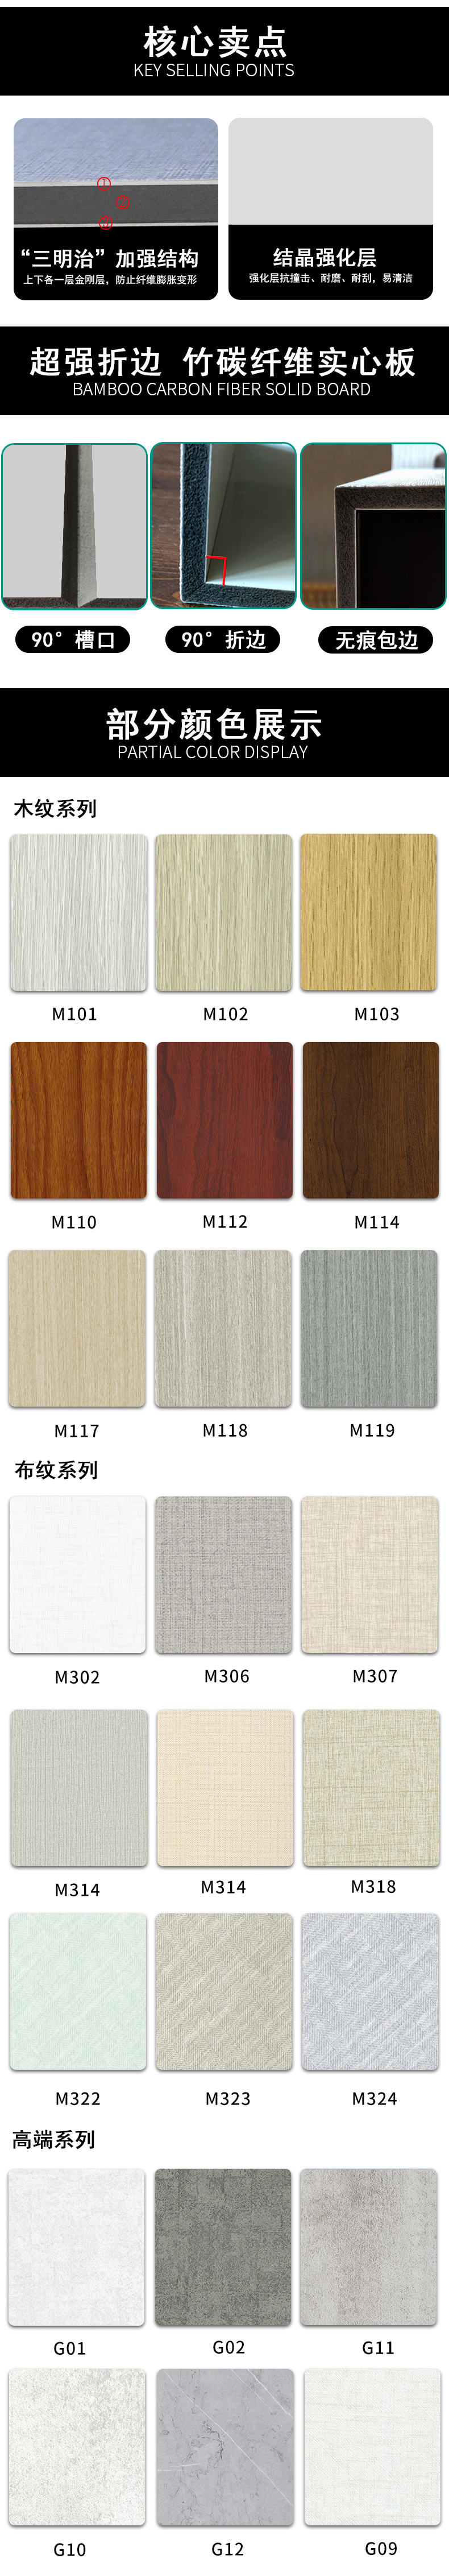 Moisture proof wood decorative panel, carbon crystal solid background wall panel, wood decorative floor, carbon crystal panel decorative panel